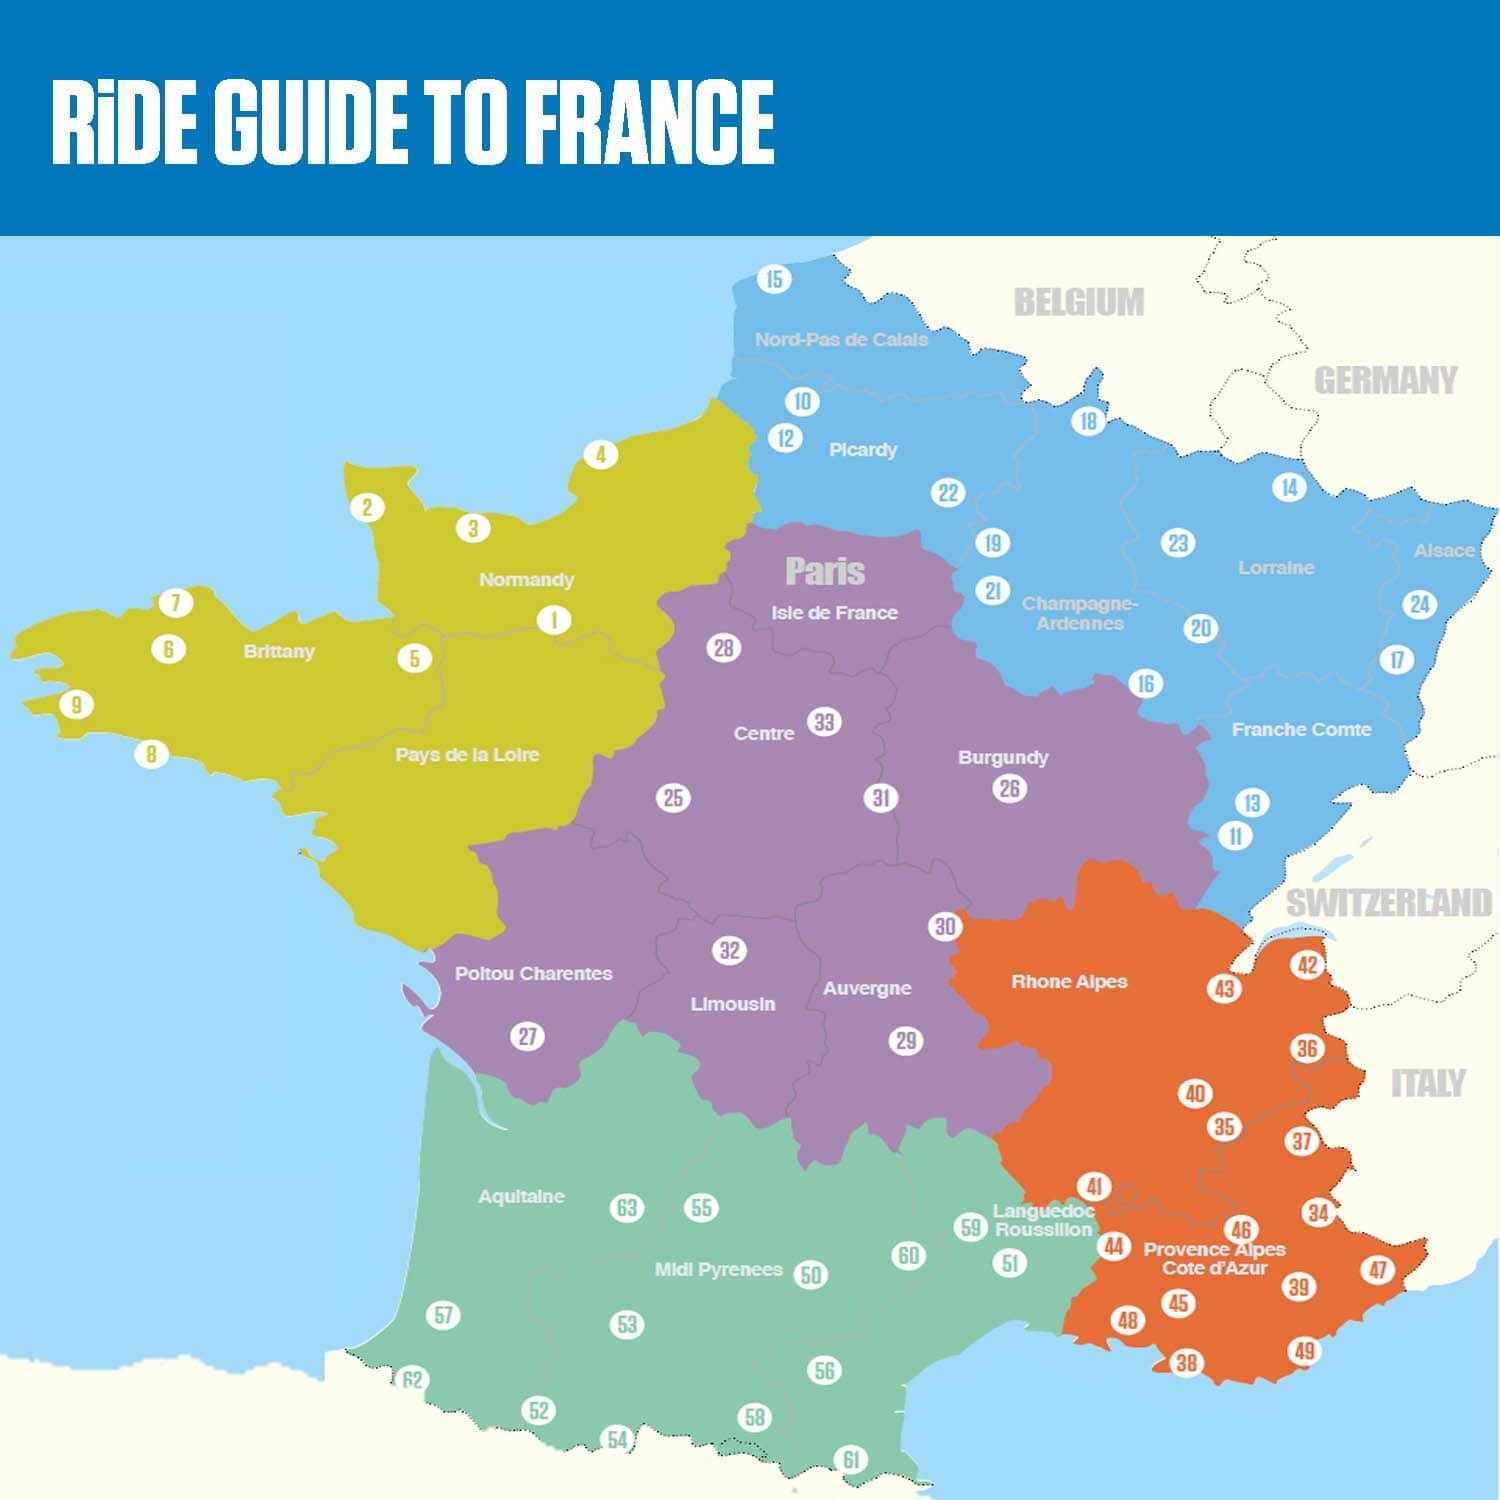 RiDE Guide to motorcycling touring in France